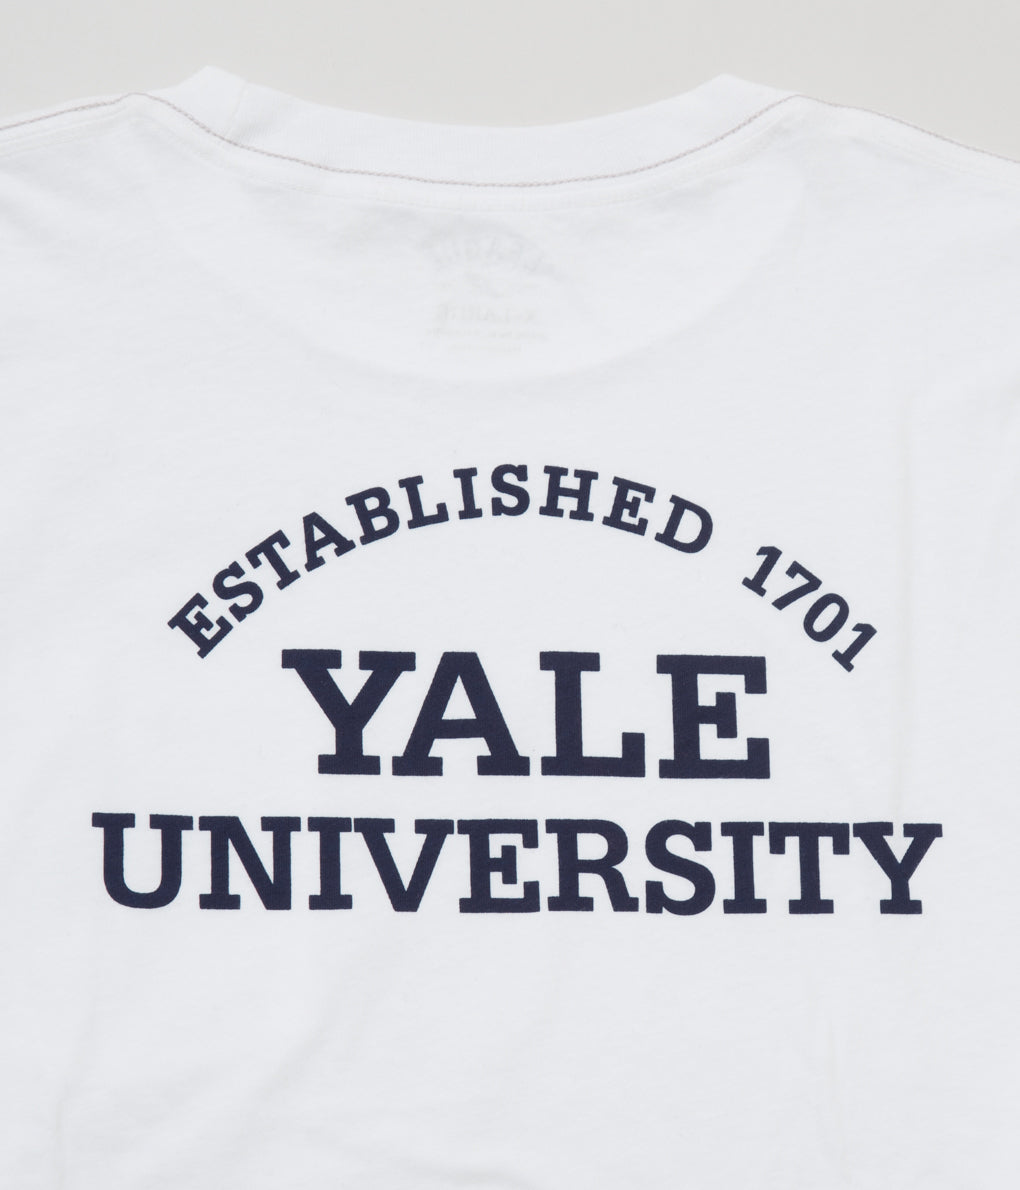 FROM USA "YALE LONG SLEEVE TEE" (WHITE)